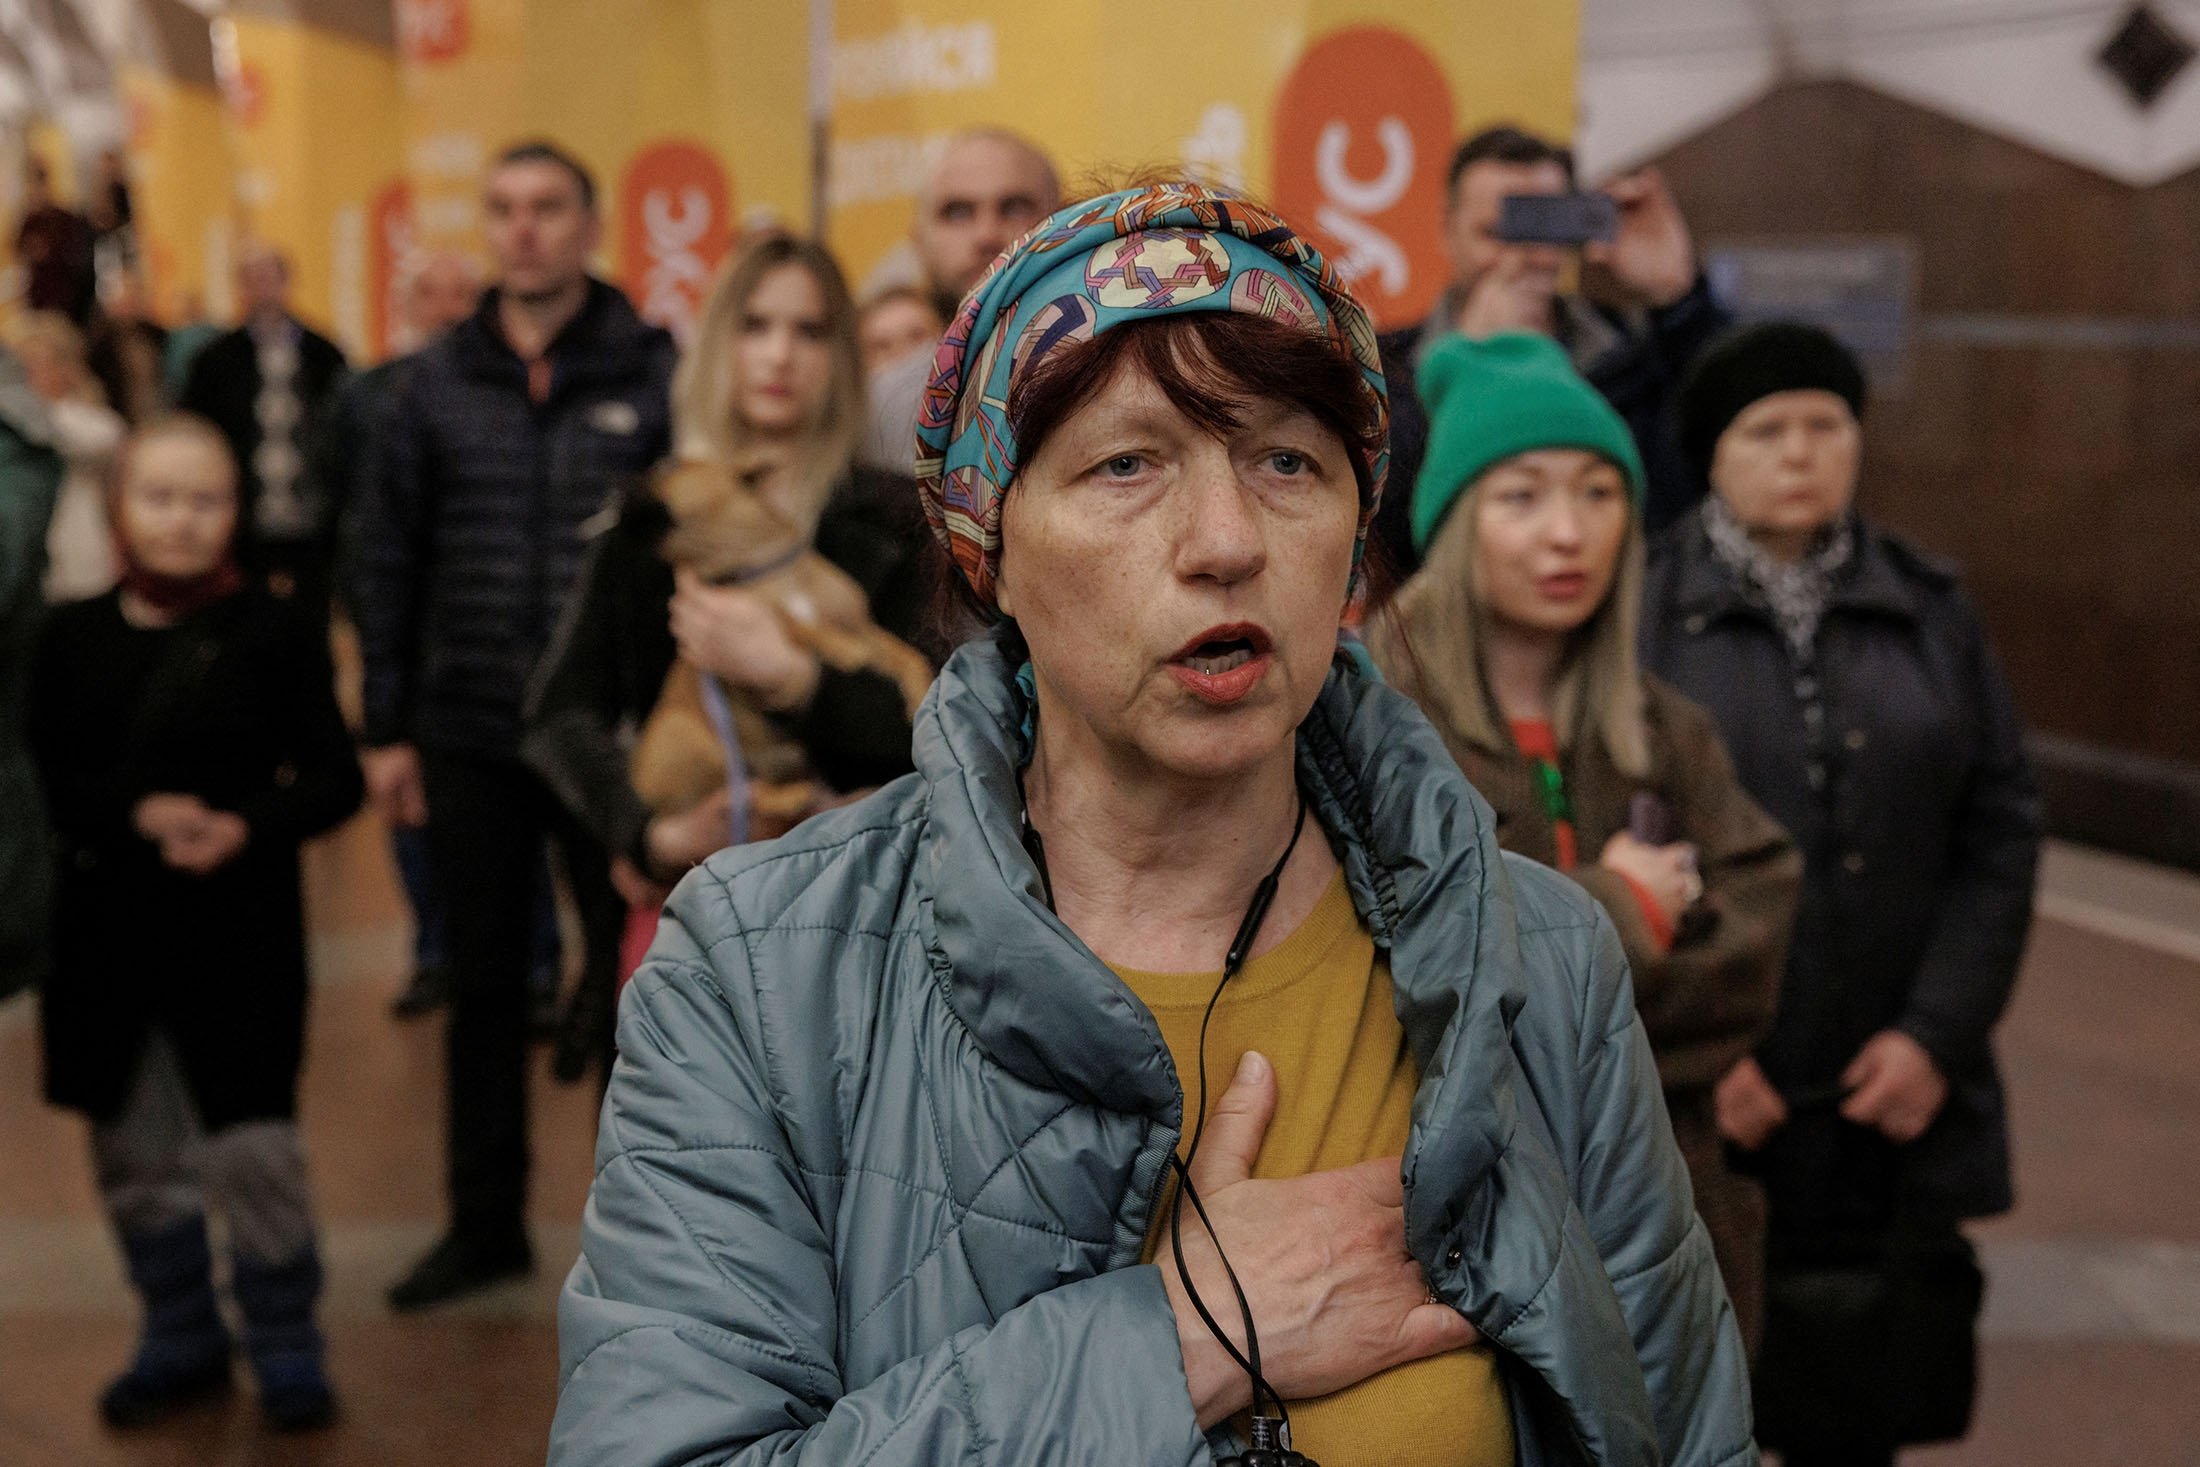 People sing the Ukrainian national anthem during a classical music concert performed by local musicians at a metro station that serves as a bomb shelter as the Russian attack on Ukraine continues in Kharkiv, Ukraine Ukraine, March 26, 2022. (Photo Reuters)